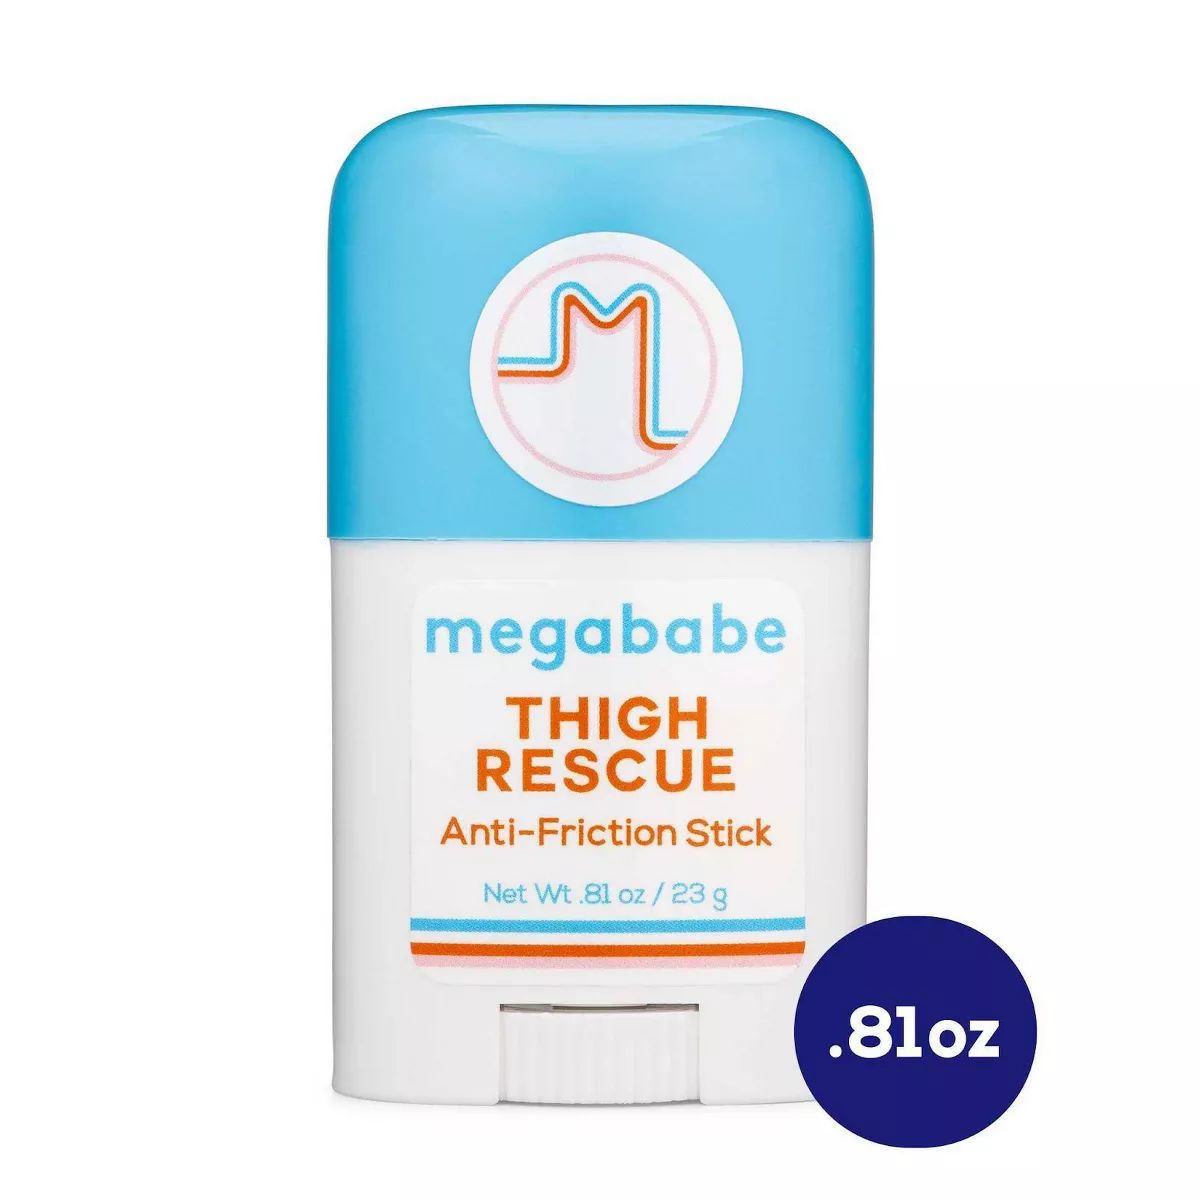 Megababe Thigh Rescue Lotion Anti-Chafe Stick - Trial Size - Pomegranate/Citrus Scent - 0.81oz | Target